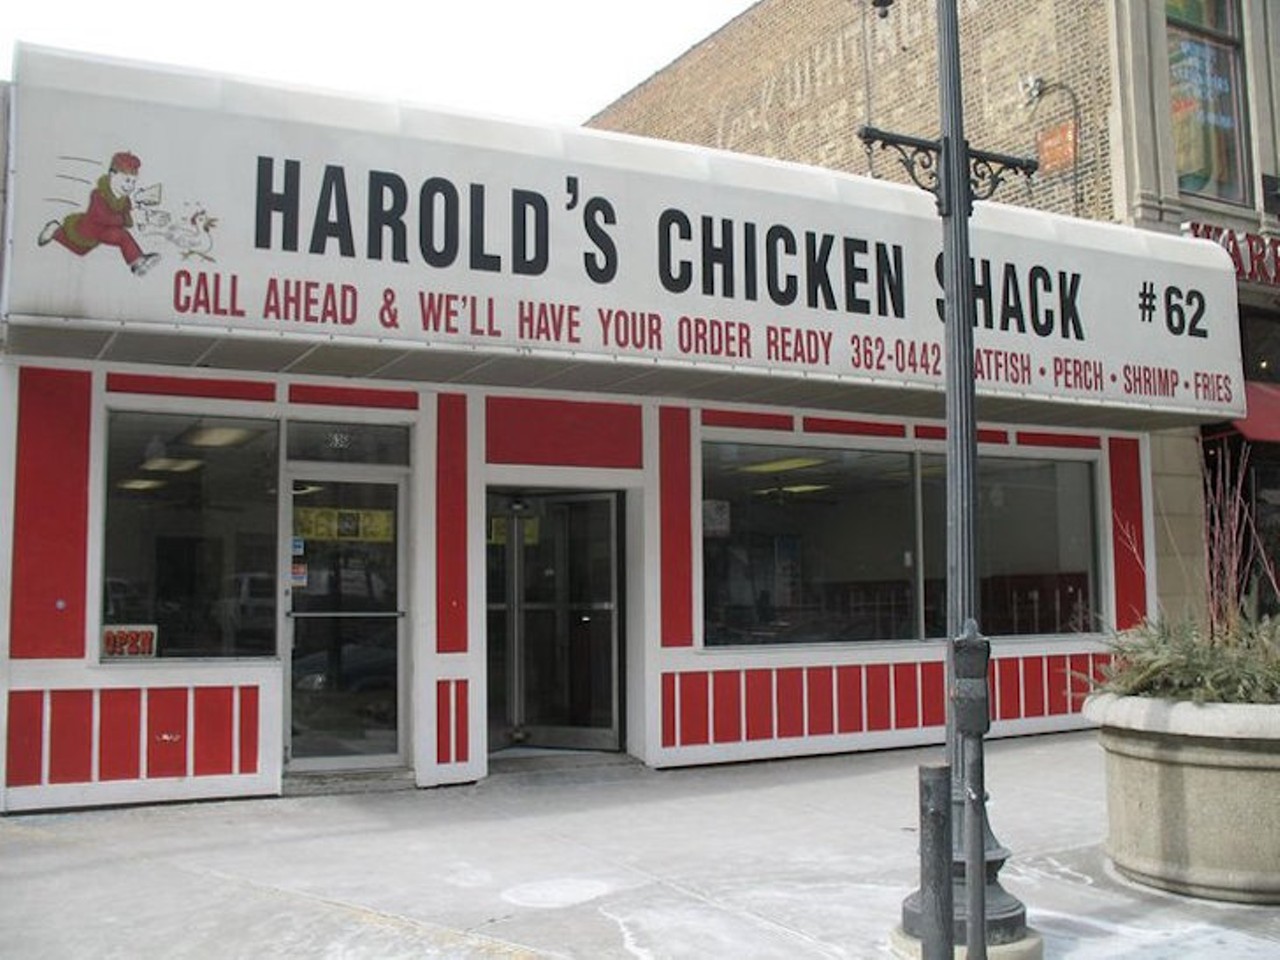 Harold&#146;s Chicken Shack 
Born and bred in 1950s South Side Chicago, Harold&#146;s Chicken has become a cultural icon in the community for its specially prepared fried chicken and historic black ownership. Harold&#146;s success has allowed the chain to expand to at least 17 locations and has garnered praise from stars like Kanye West, Common, Rhymefest, J.U.I.C.E., G Herbo, Chance the Rapper, Freddie Gibbs, Lupe Fiasco and Dreezy. Kendrick Lamar even claims to have flown to Harold&#146;s all the way from Rome just for dinner. Want to buy us a ticket Kendrick?
Photo via Harold's Chicken Shack Downtown/Facebook